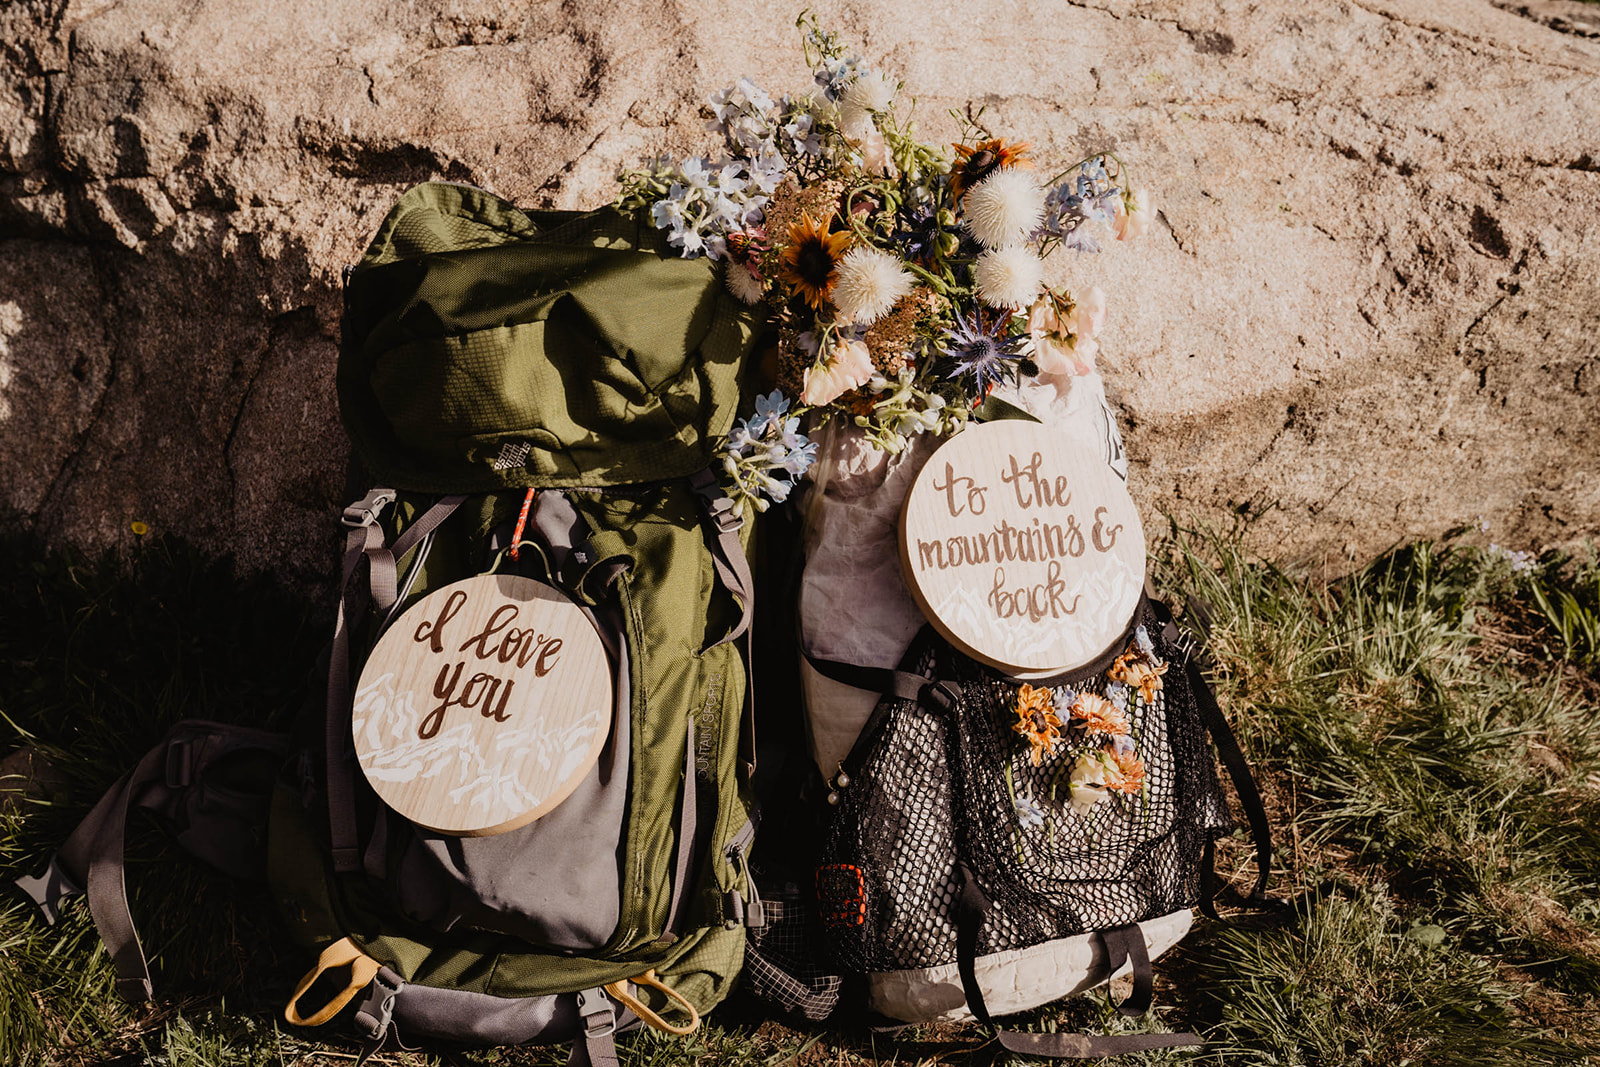 Two hiking packs decorated with flowers, and wooden signs that read "I love you" and "to the mountains"